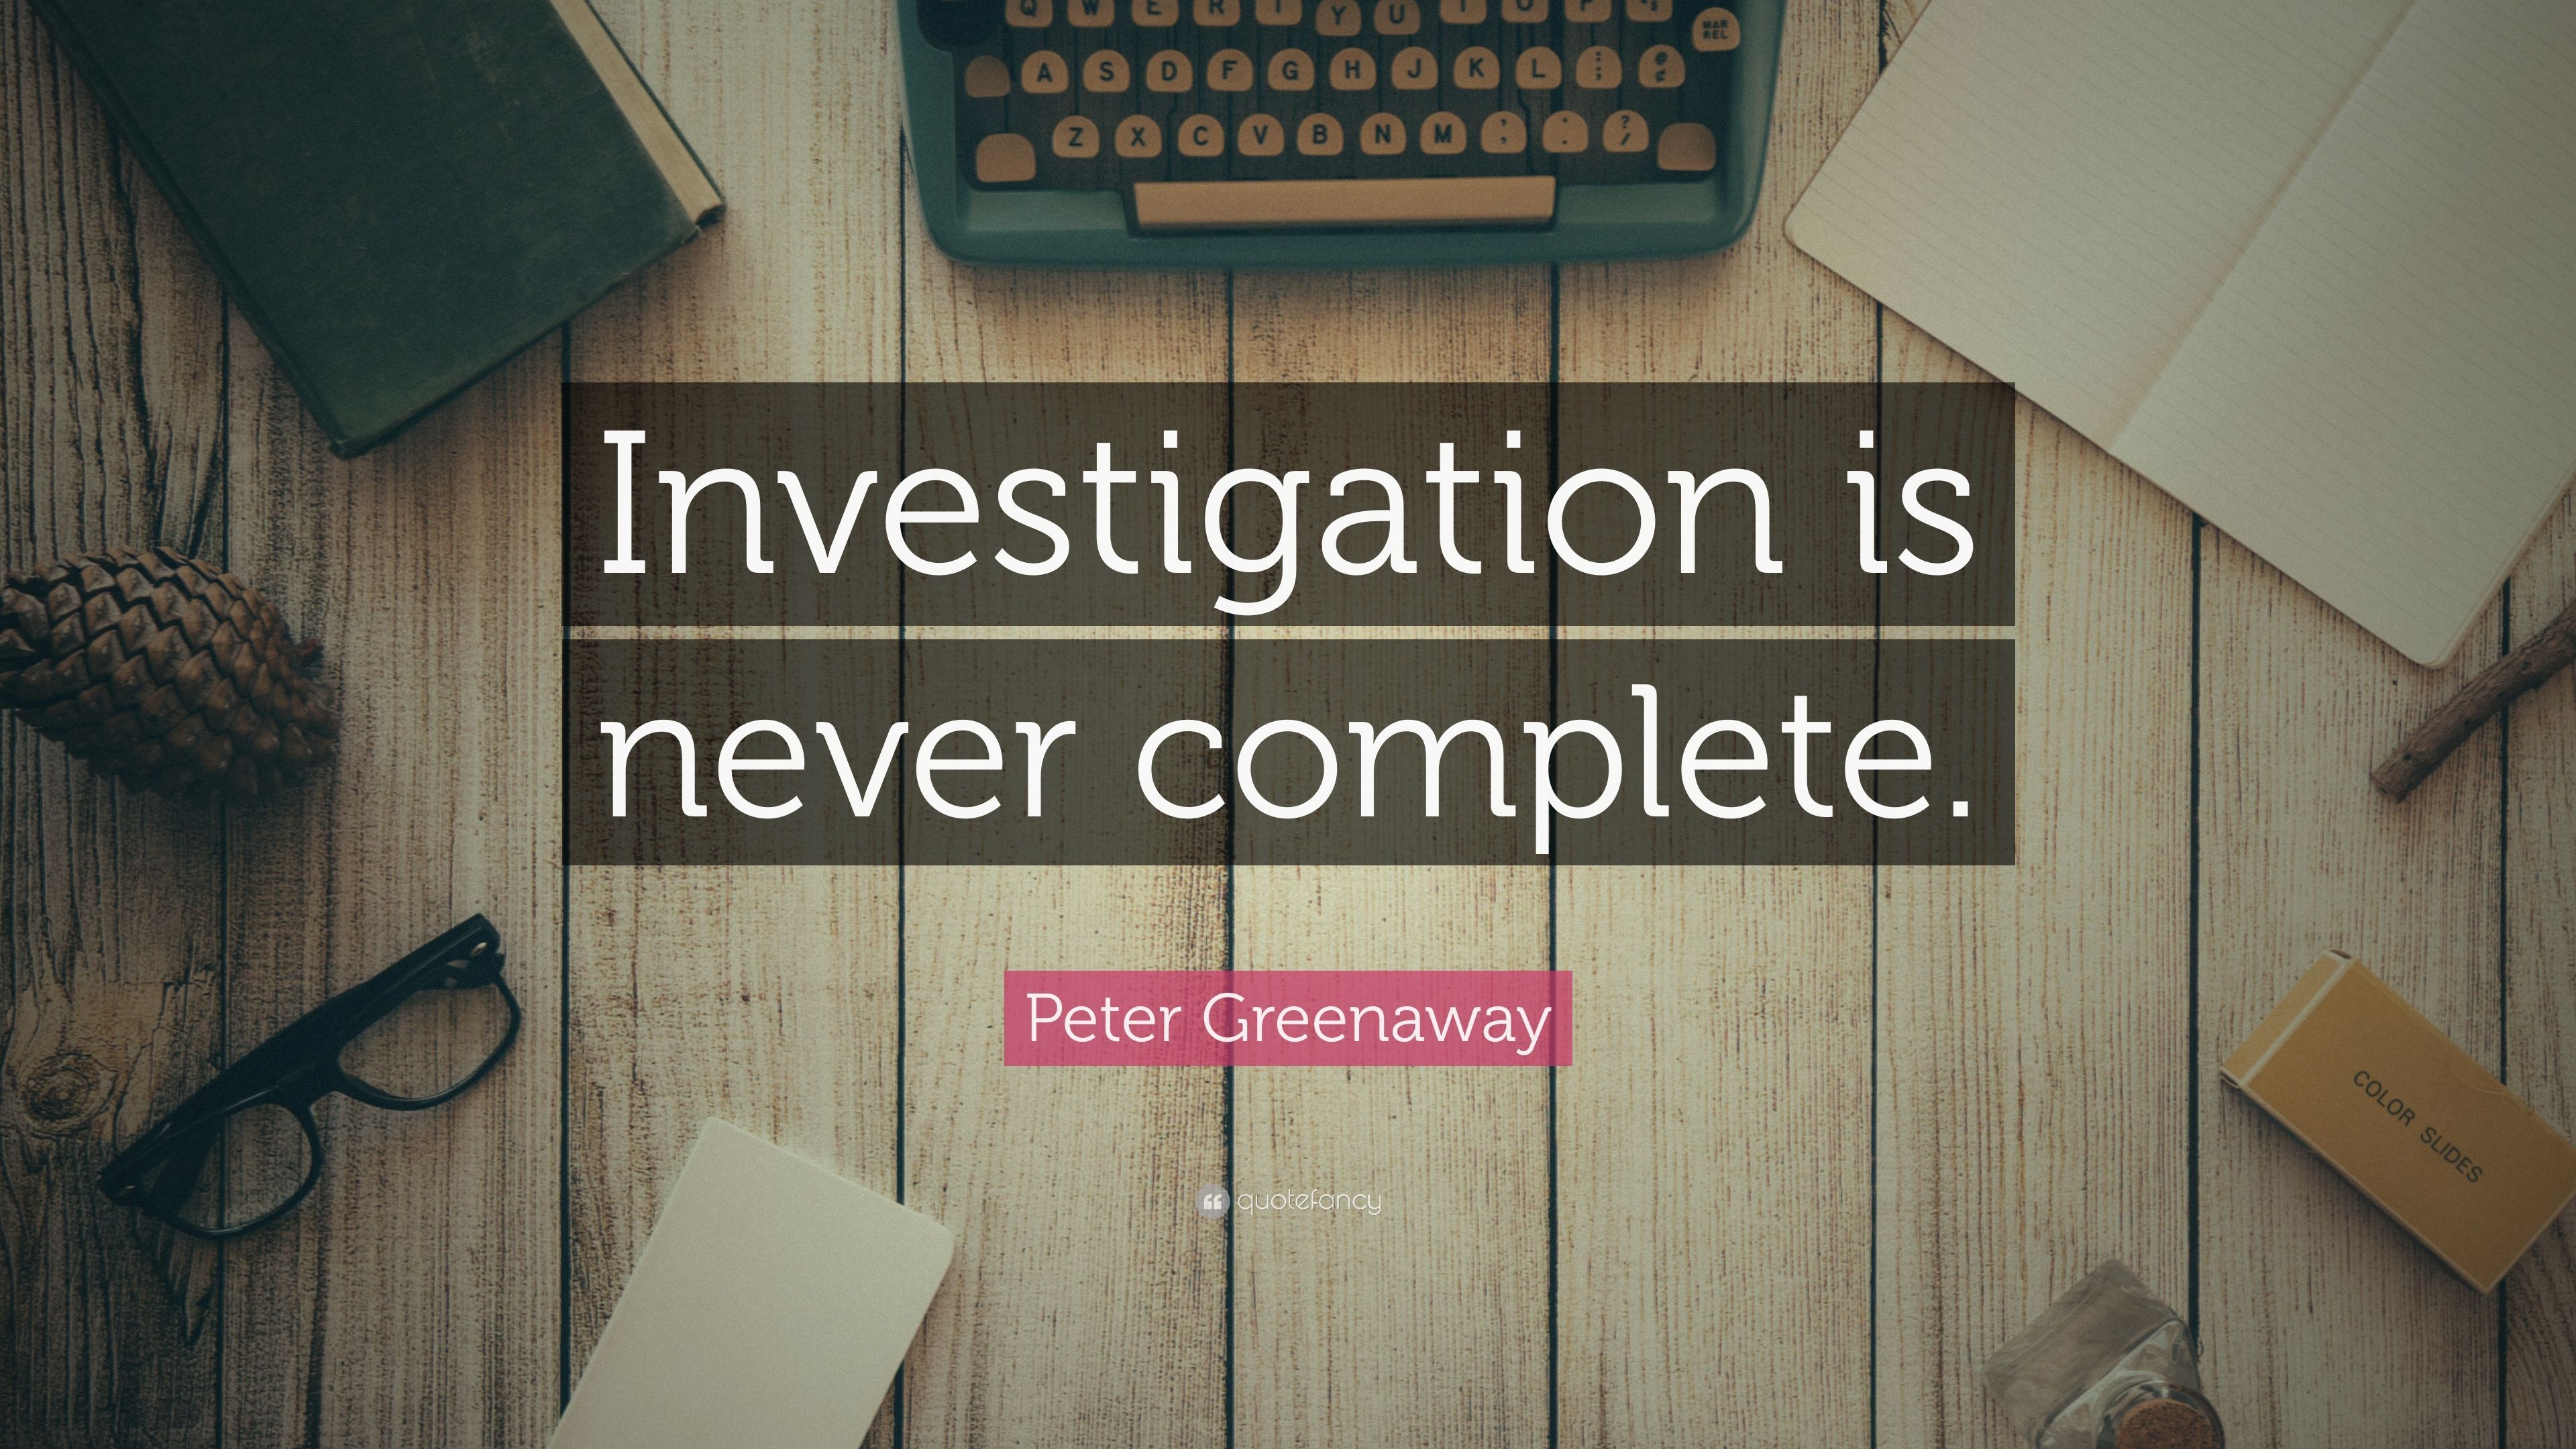 Peter Greenaway Quote: “Investigation is never complete.” 7